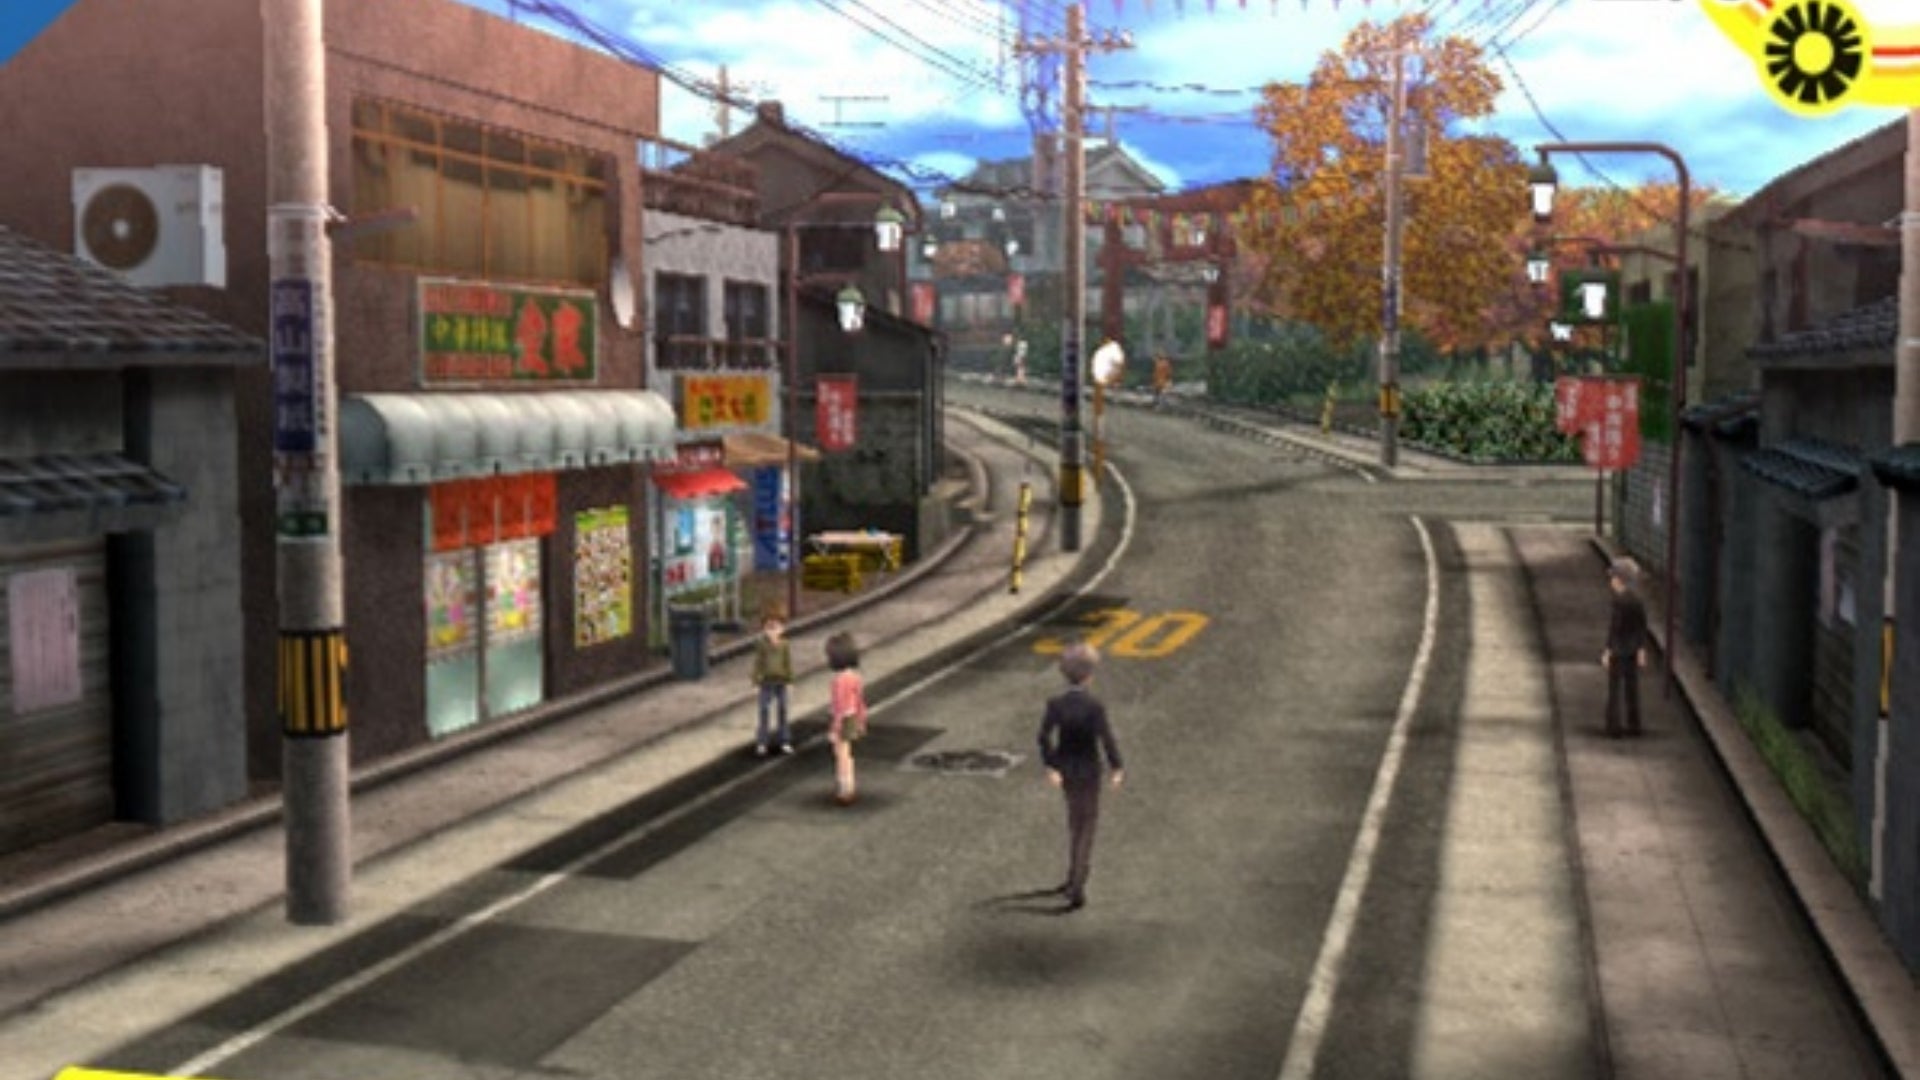 A street view of a city in Persona 4